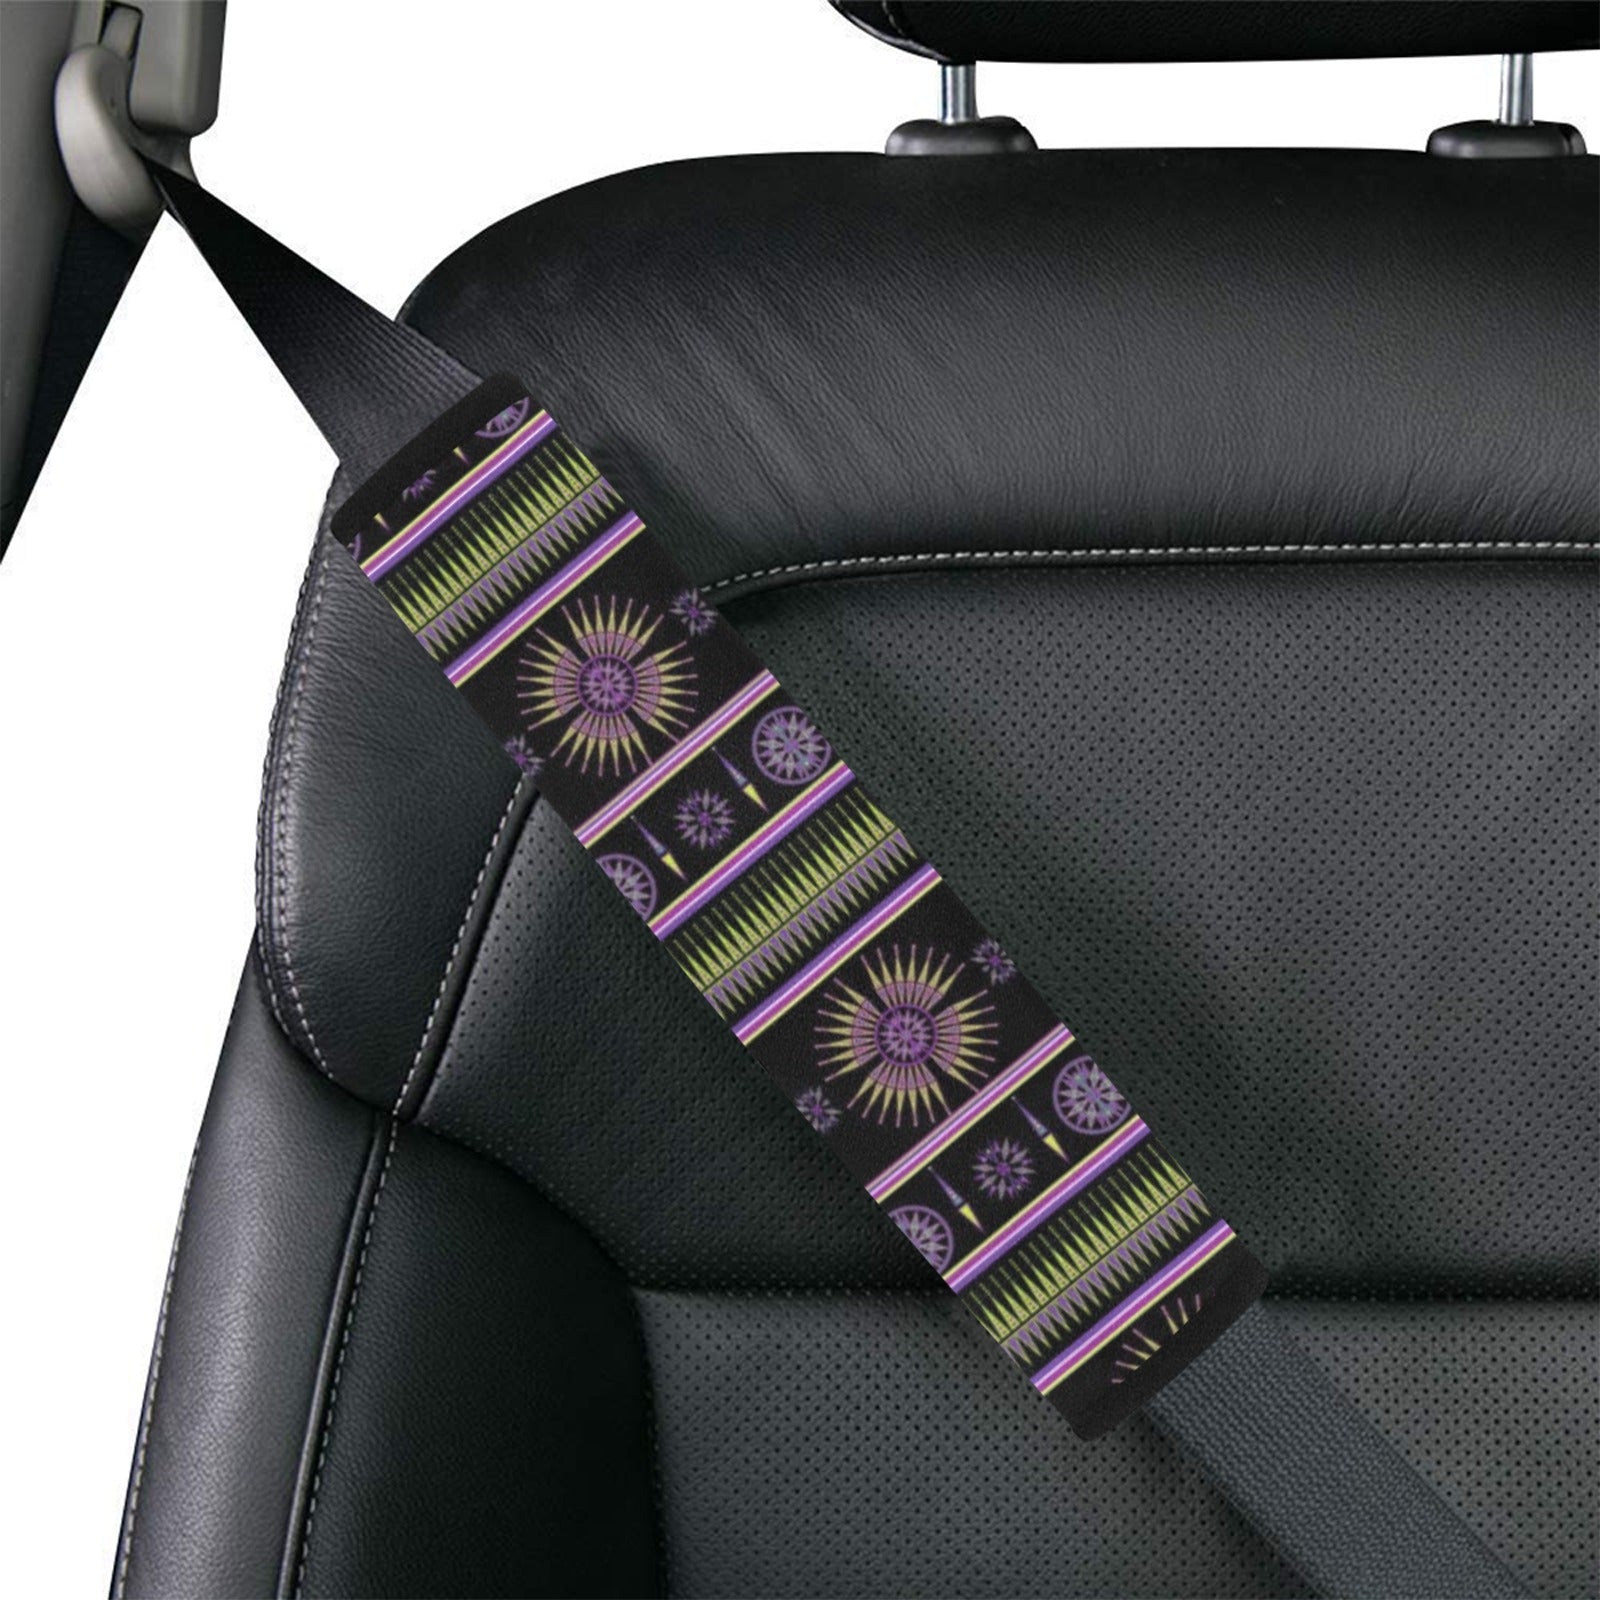 Evening Feather Wheel Car Seat Belt Cover 7''x12.6'' (Pack of 2)